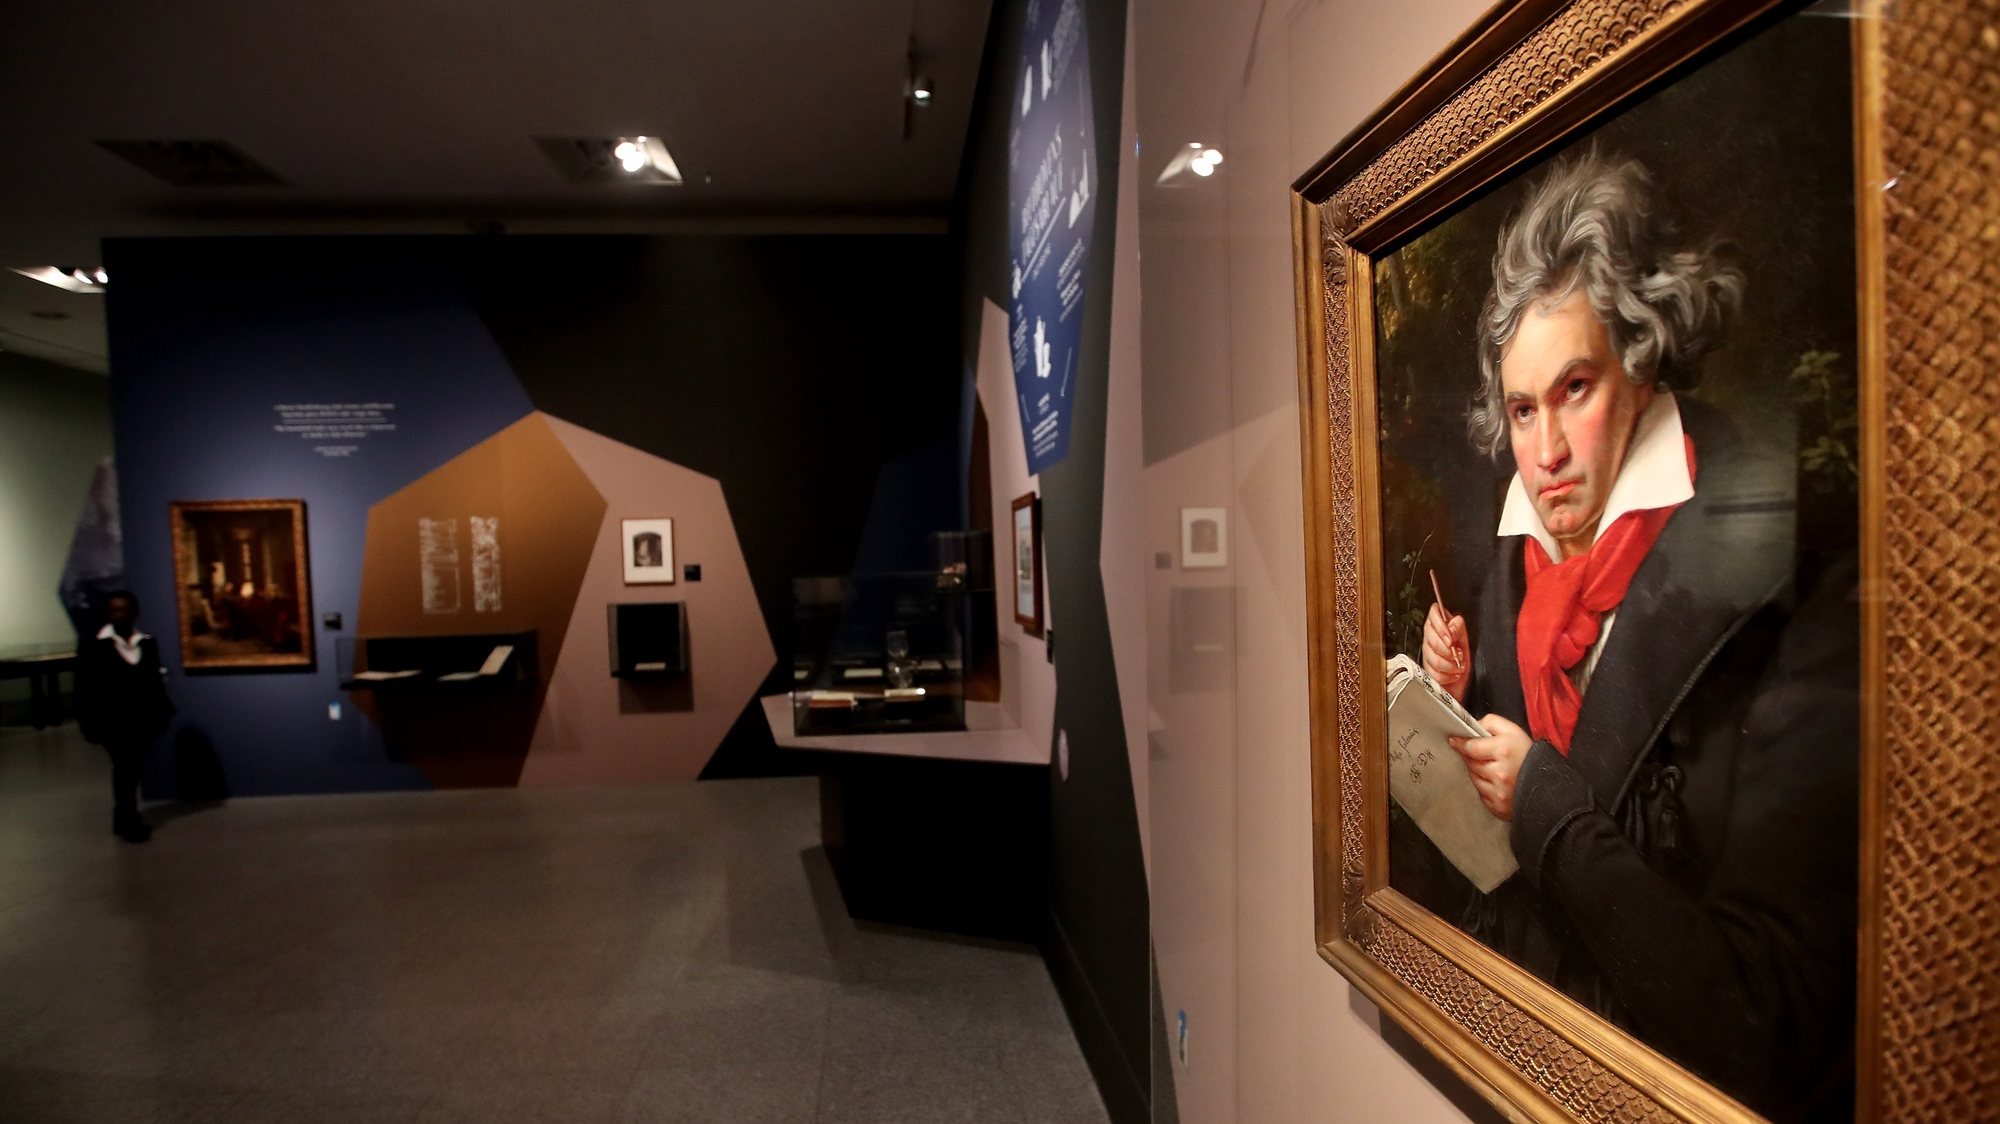 epa08069099 An portrait of German composer Ludwig van Beethoven is seen during the exhibition &#039;Beethoven World Citizen Music&#039; at the Bundeskunsthalle museum in Bonn, Germany, 13 December 2019. Ludwig van Beethoven (1770-1827) is considered one of the most famous and influential composers in the world. On the occasion of his 250th birthday in 2020, a series of concerts and commemorative events will take place all over Germany throughout the whole year.  EPA/FRIEDEMANN VOGEL